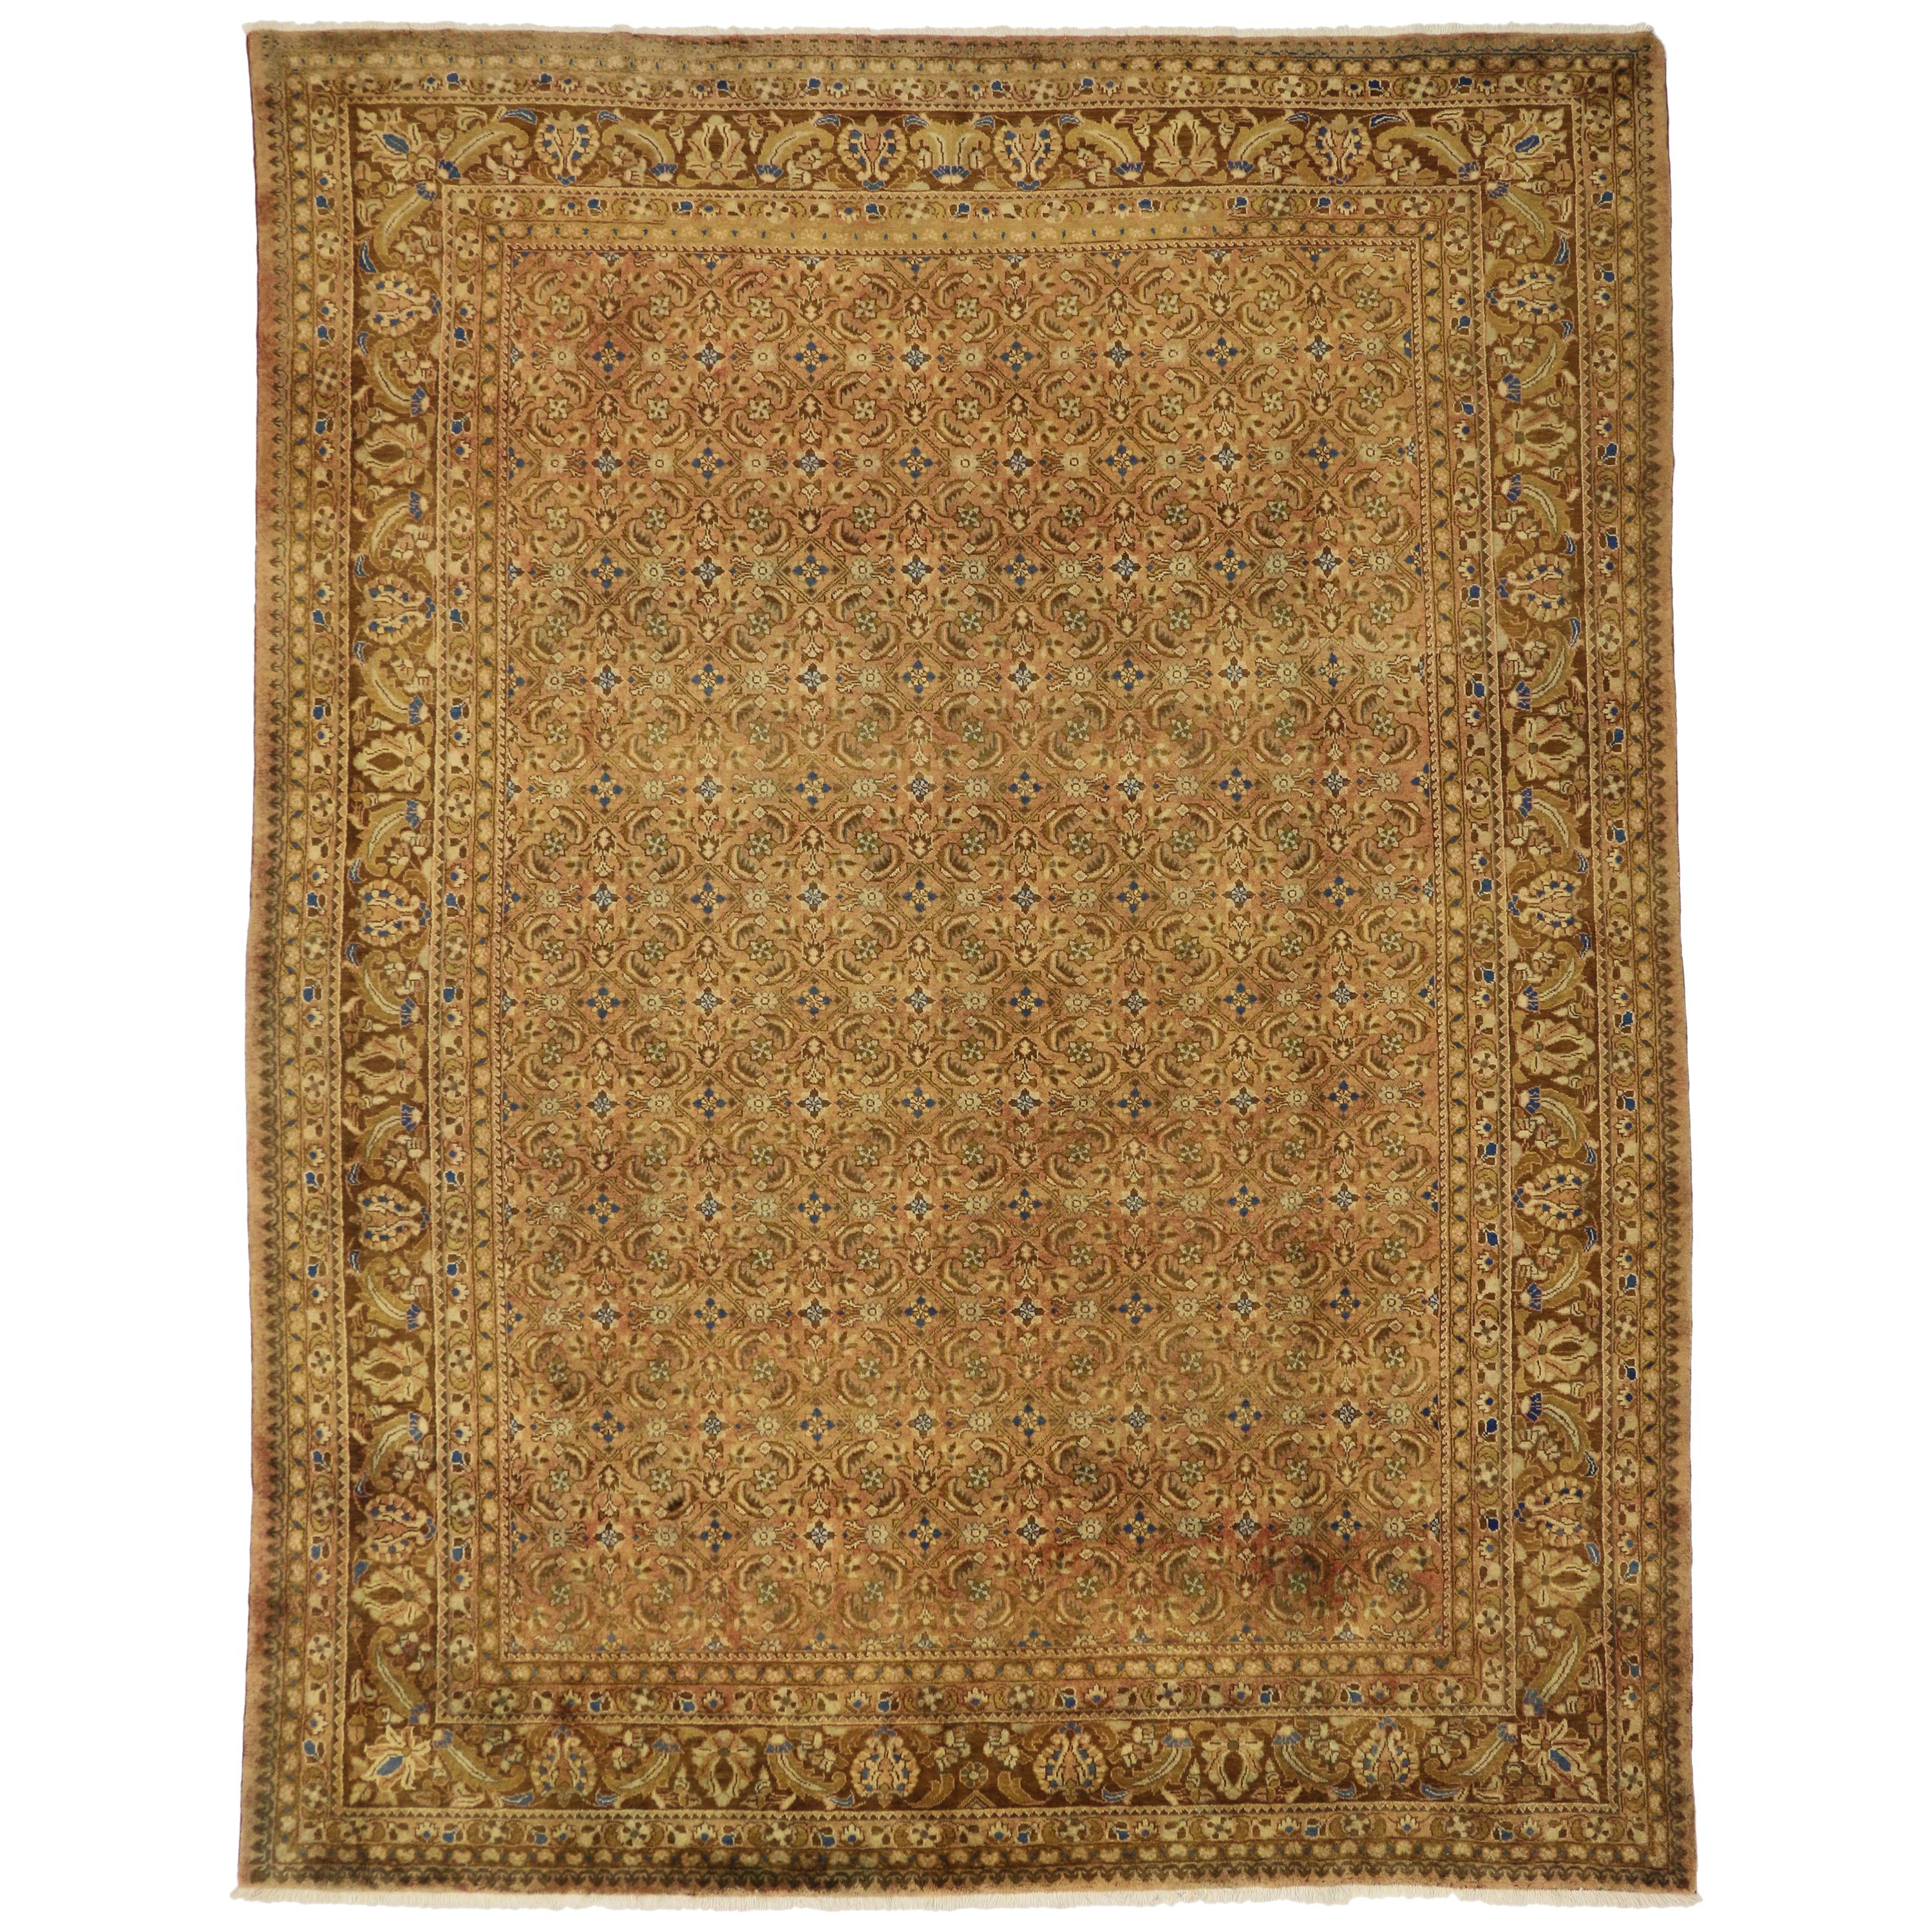 Vintage Persian Hamadan Rug with Victorian Style, Warm and Neutral Colors